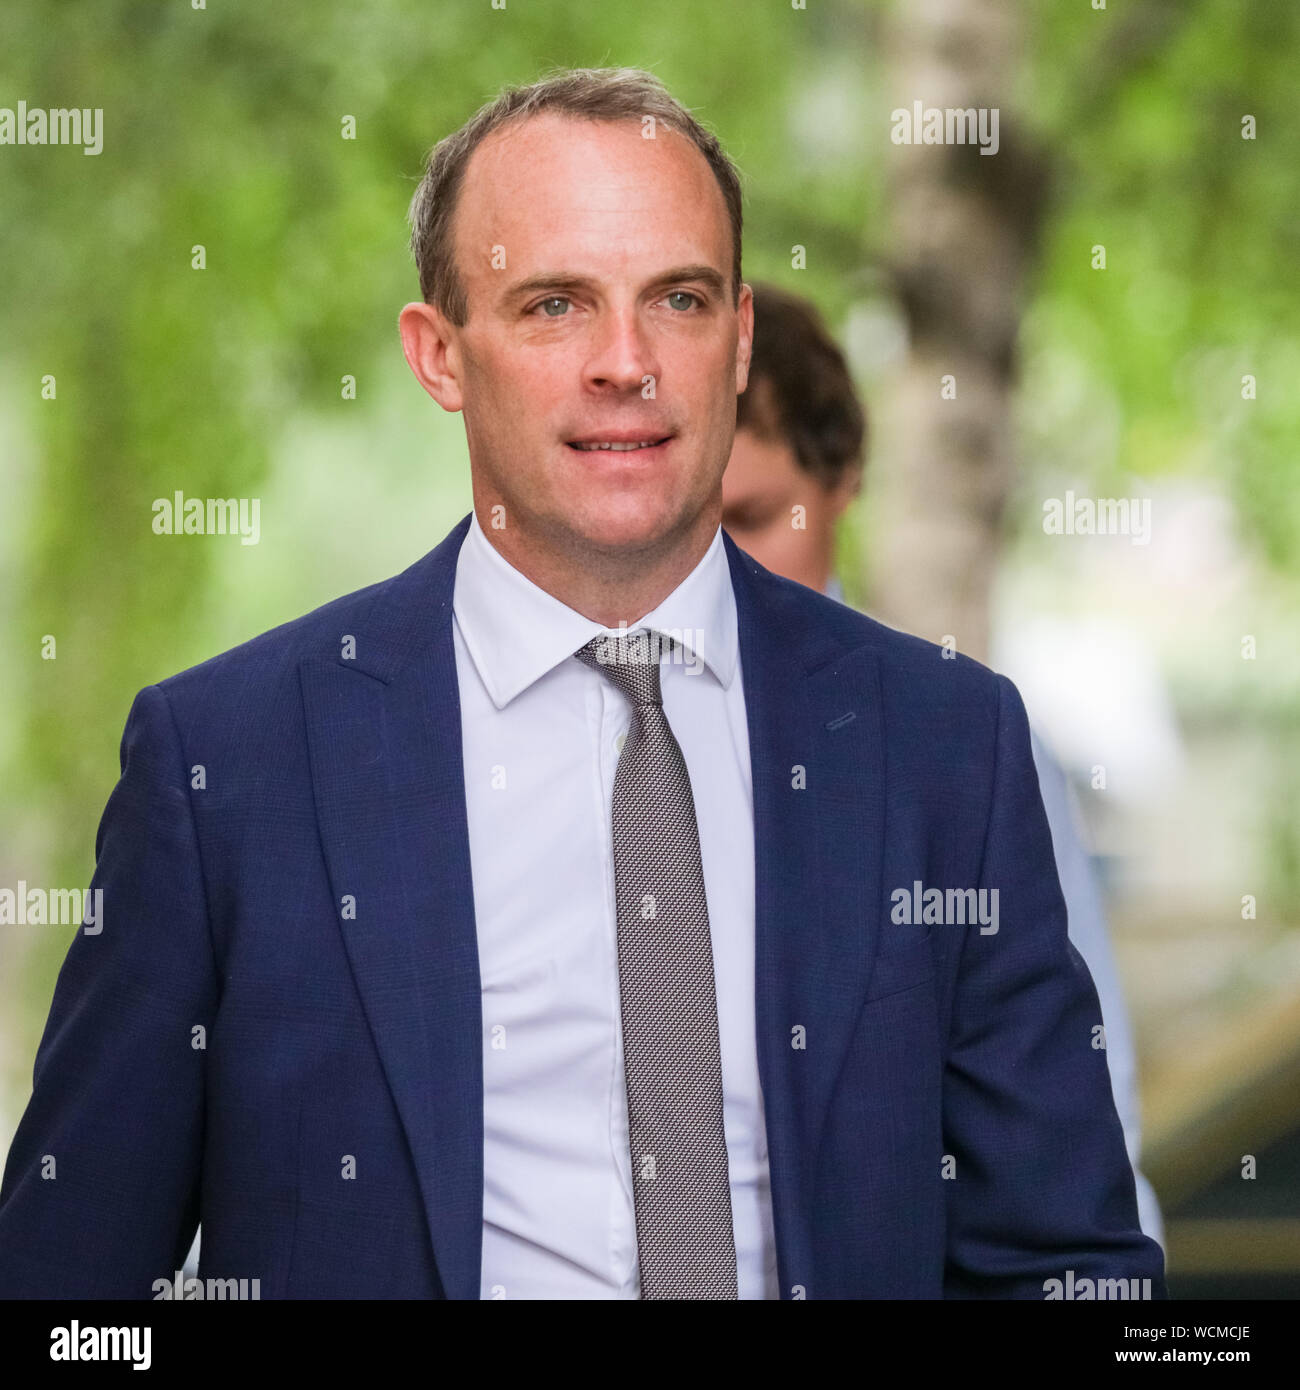 Westminster, London, UK. 28th August 2019. Dominic Raab, MP, Secretary of State for Foreign and Commonwealth Affairs, walks along Downing Street and enters No10. PM Boris Johnson's government has today officially asked the Queen to approve the prorogation of Parliament for 1 month, starting in September. Credit: Imageplotter/Alamy Live News Stock Photo